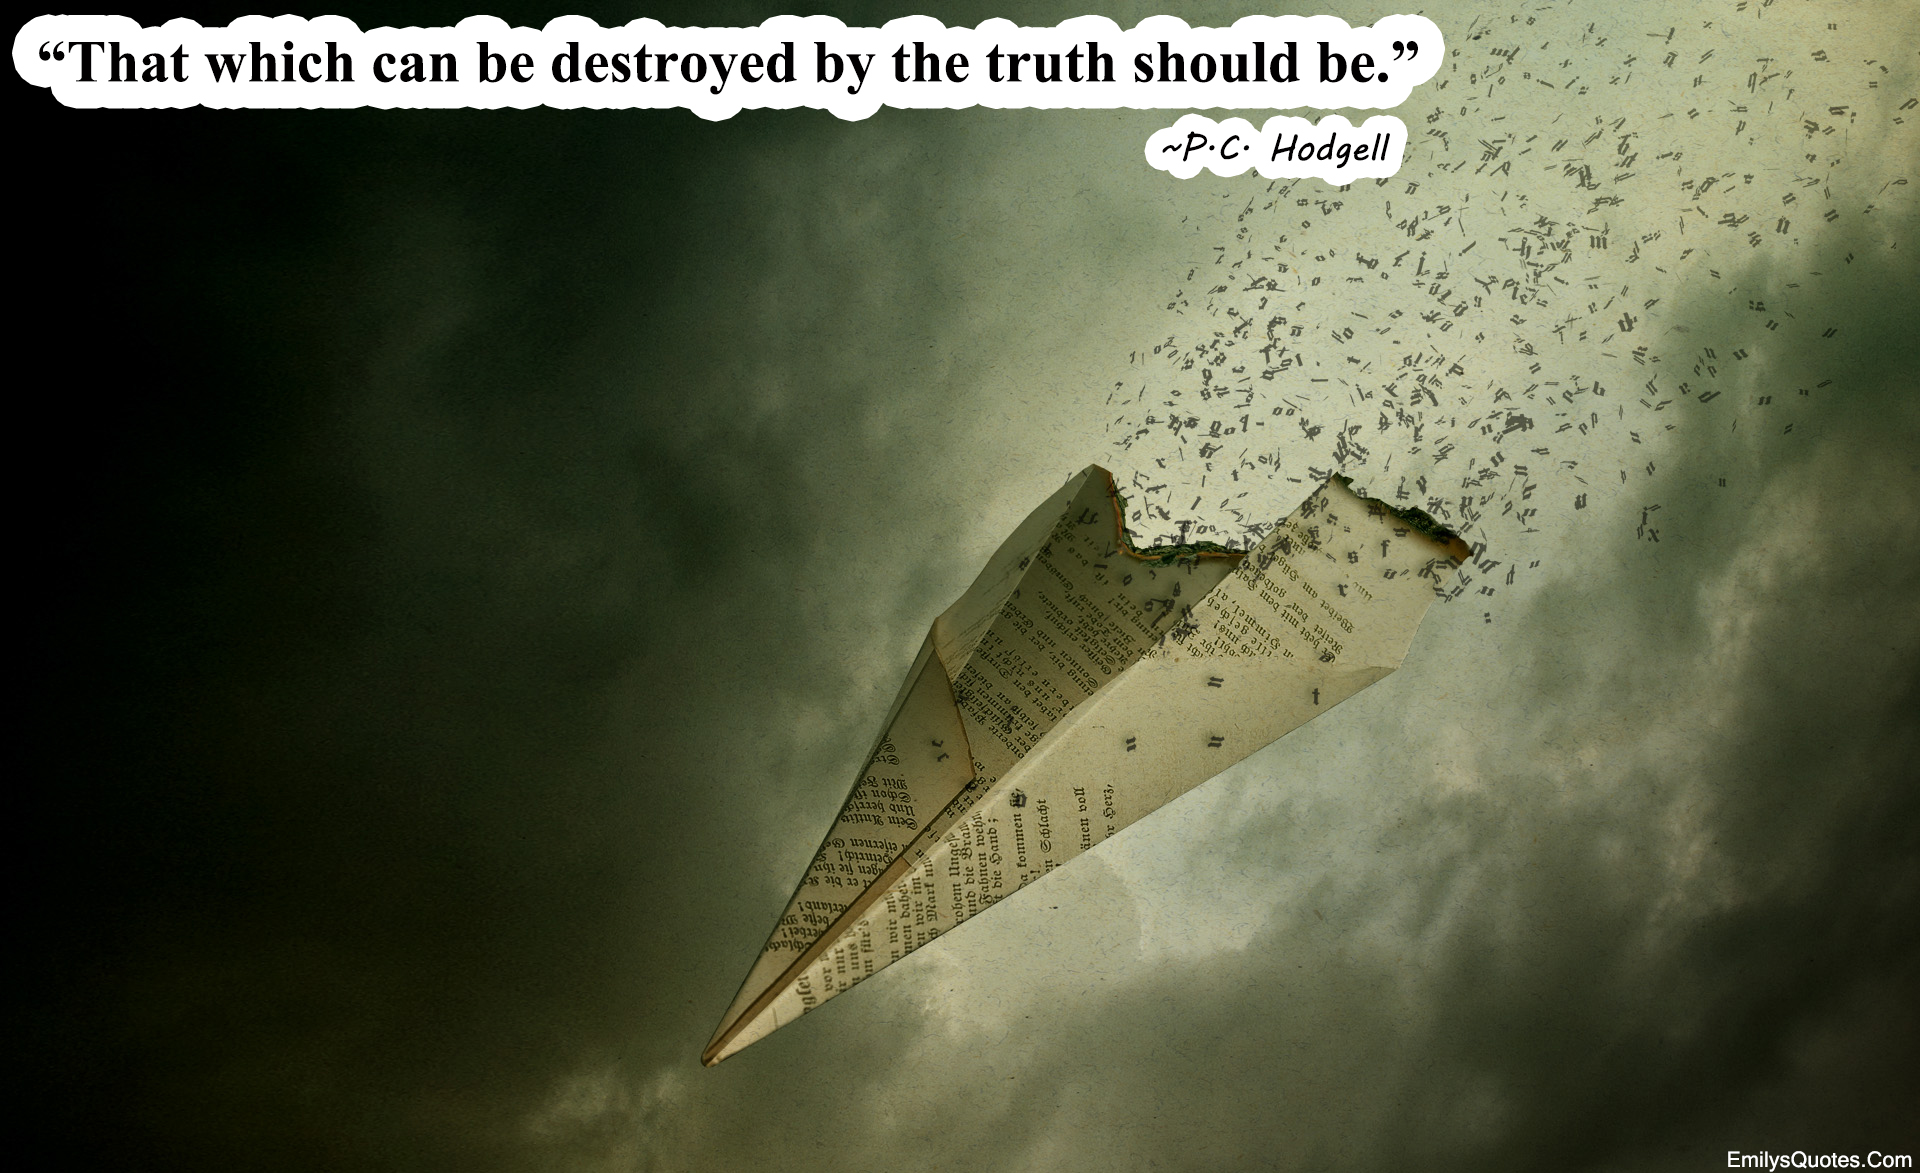 That which can be destroyed by the truth should be